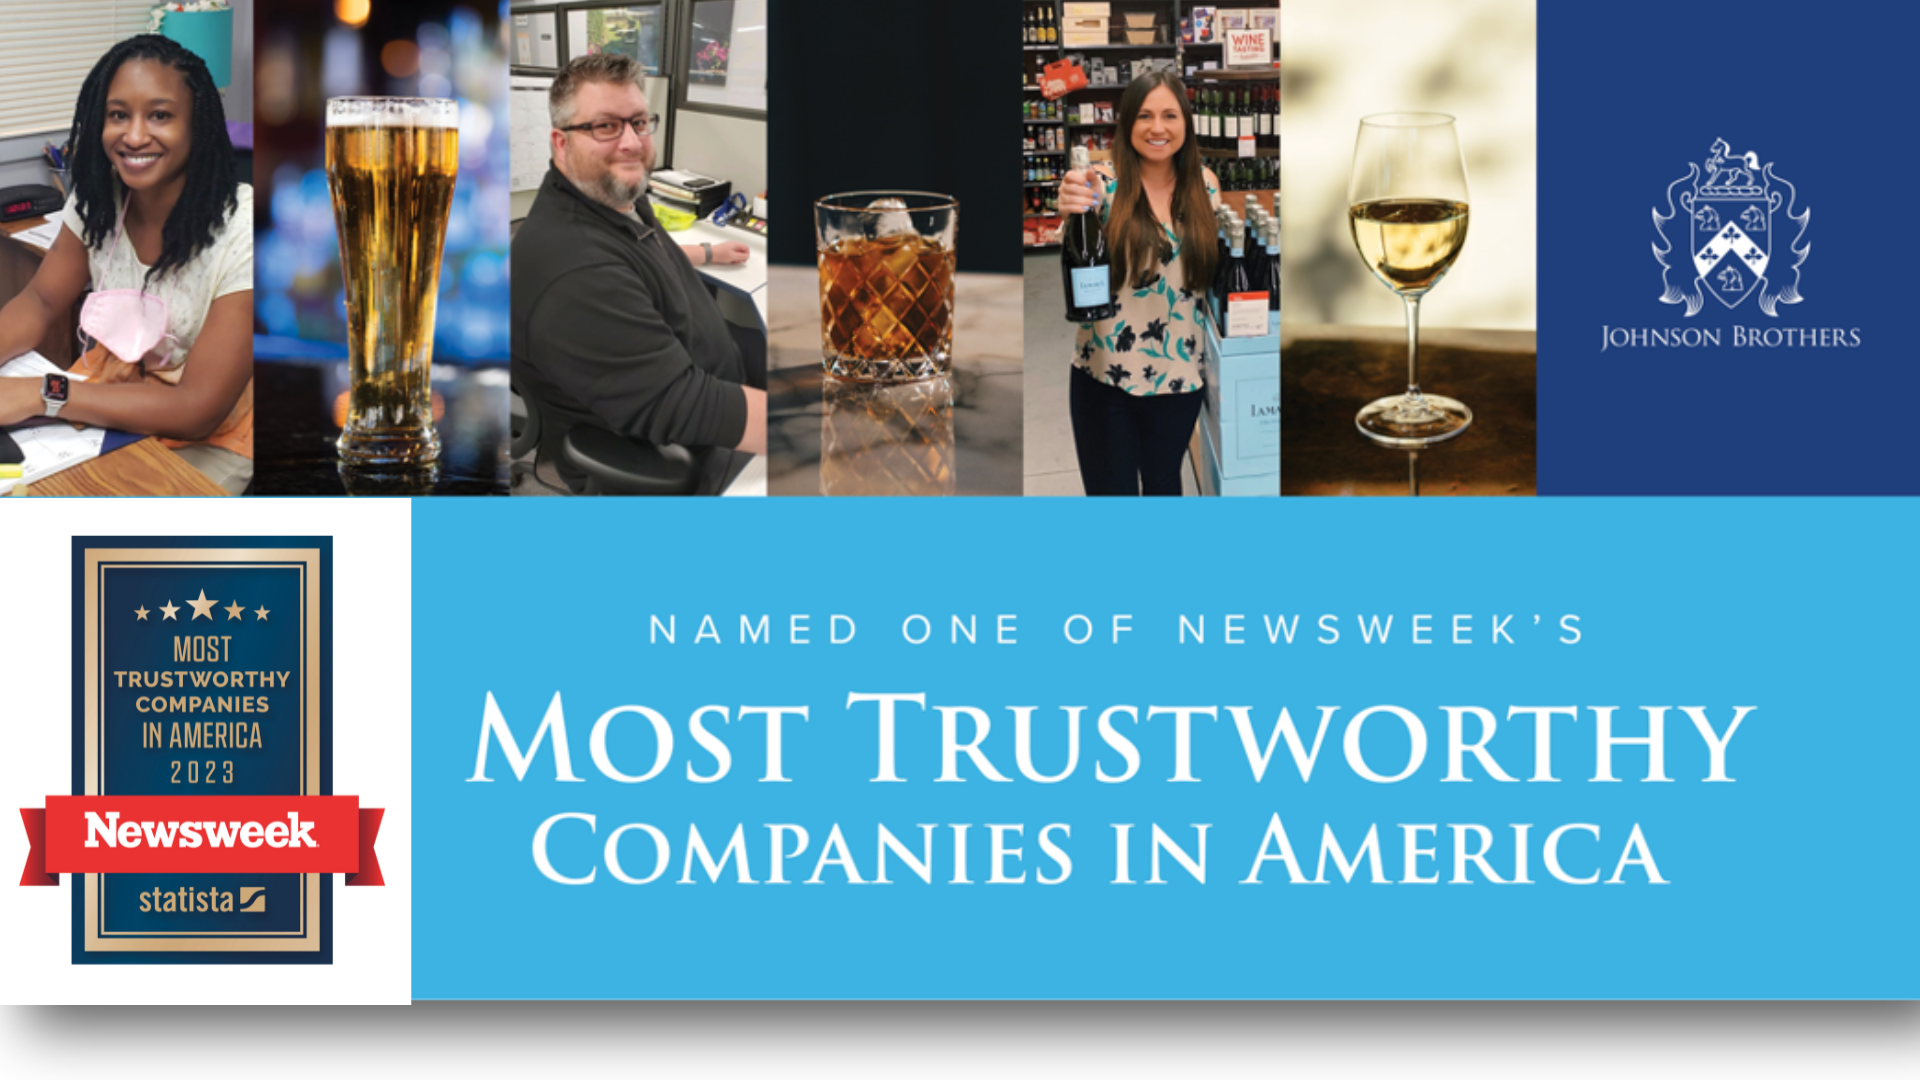 Johnson Brothers Recognized as a 2023 Most Trustworthy Company in America by Newsweek